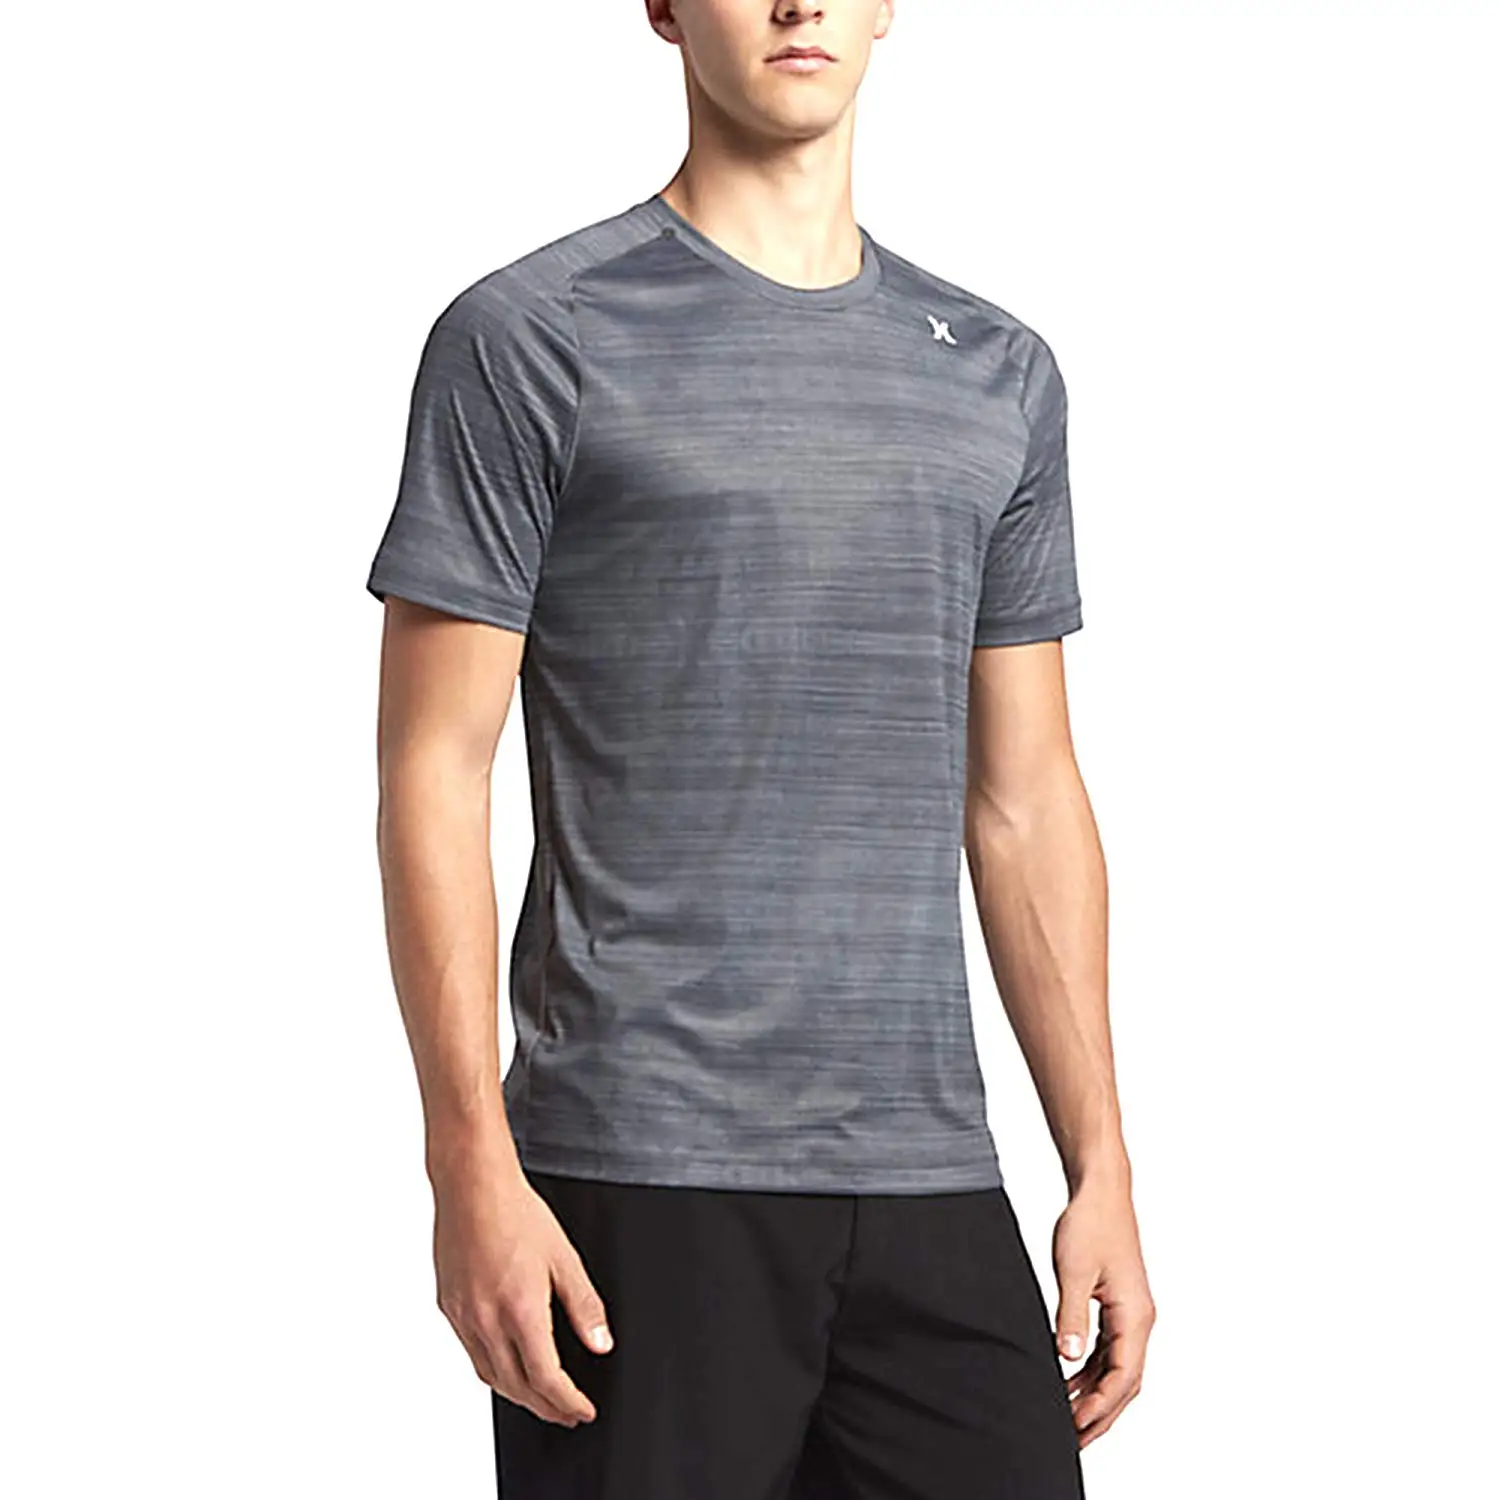 Cheap Hurley Surf Shirt, find Hurley Surf Shirt deals on line at ...